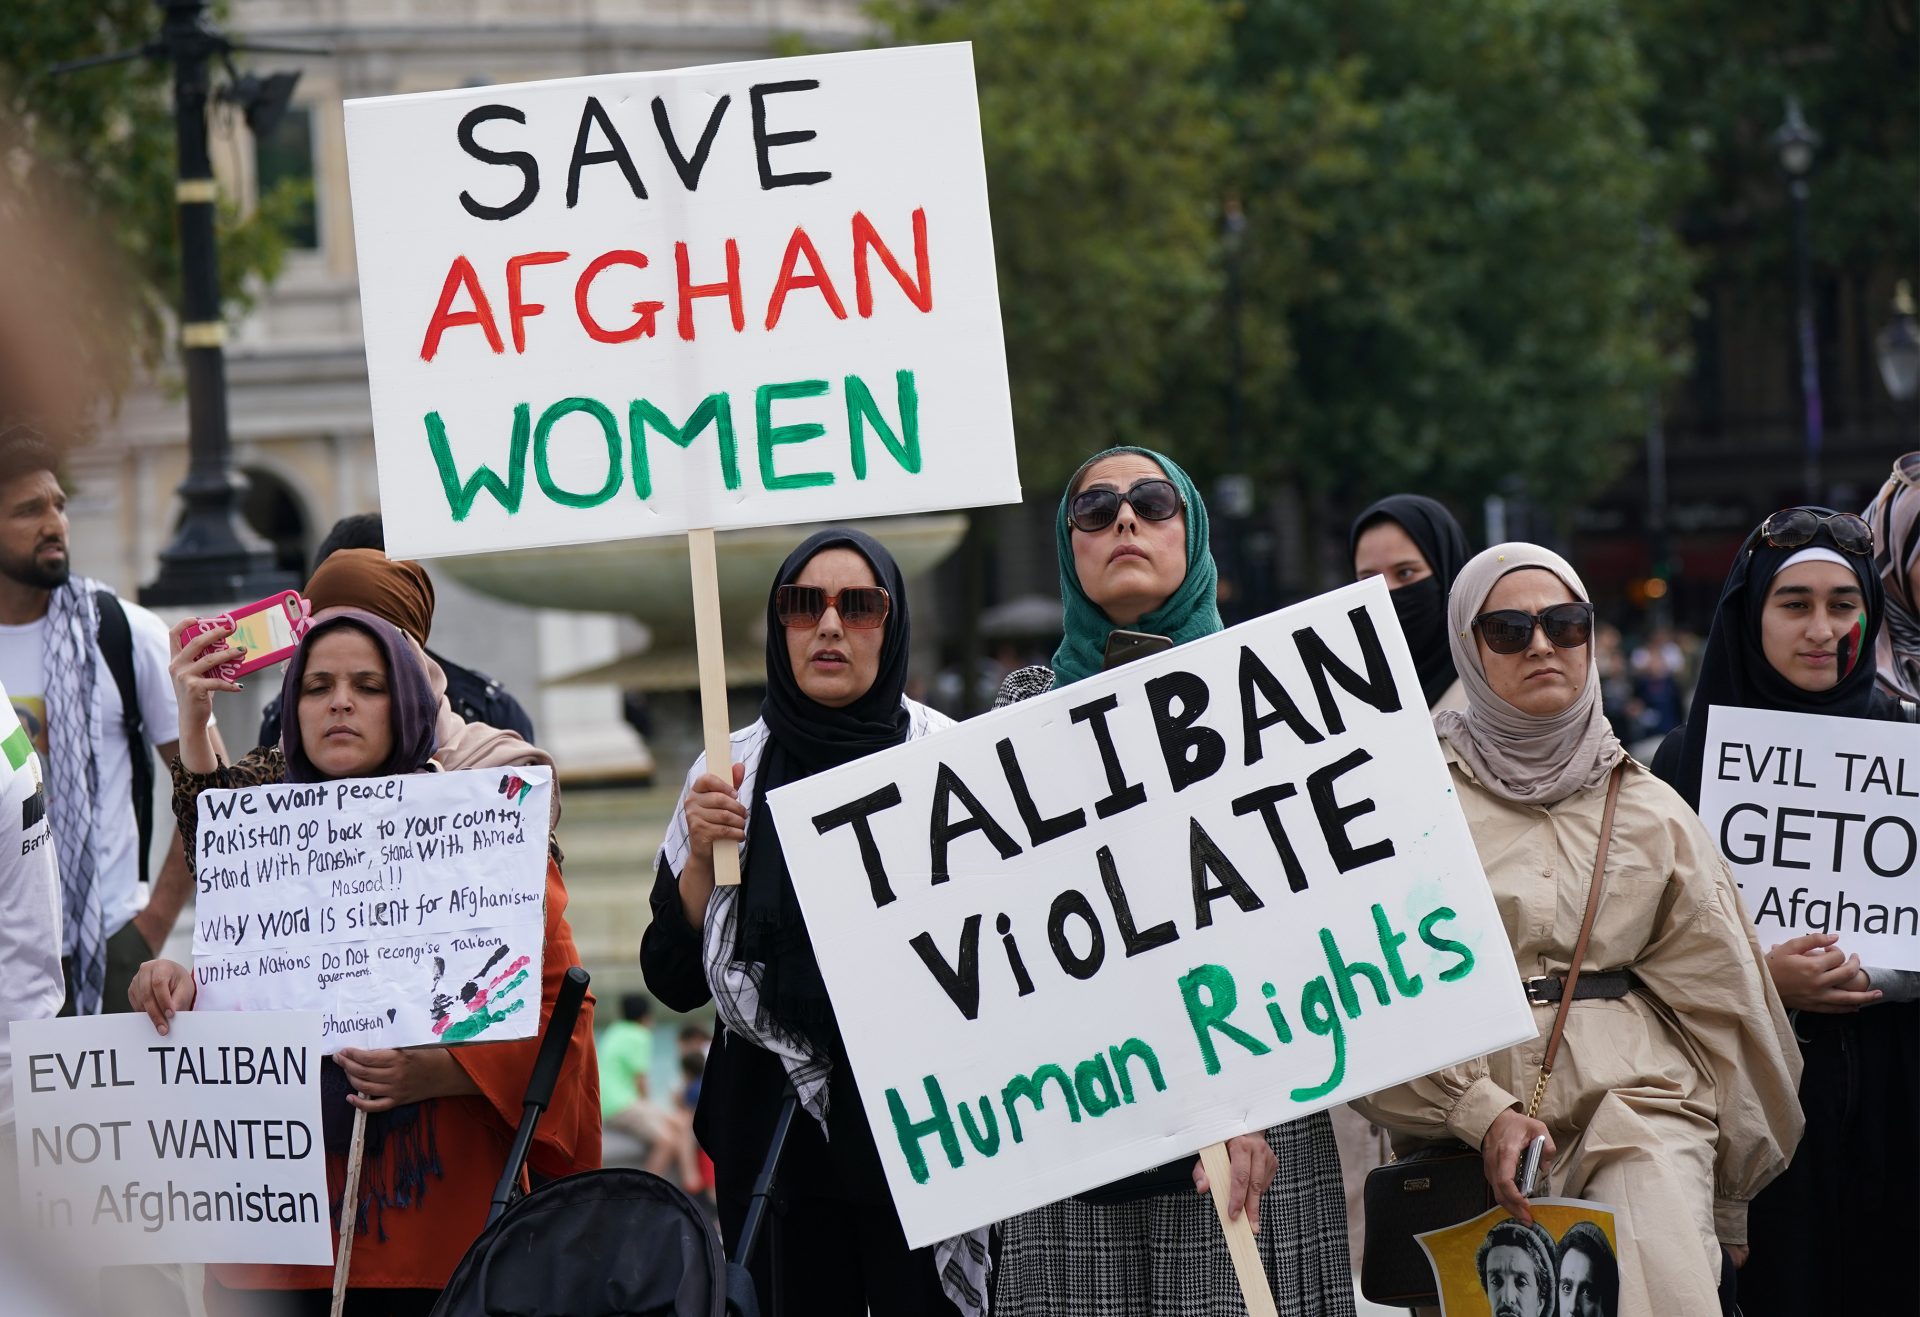  People at an Afghan solidarity rally in Trafalgar Square. Photo:  Yui Mok/PA Wire/PA Images